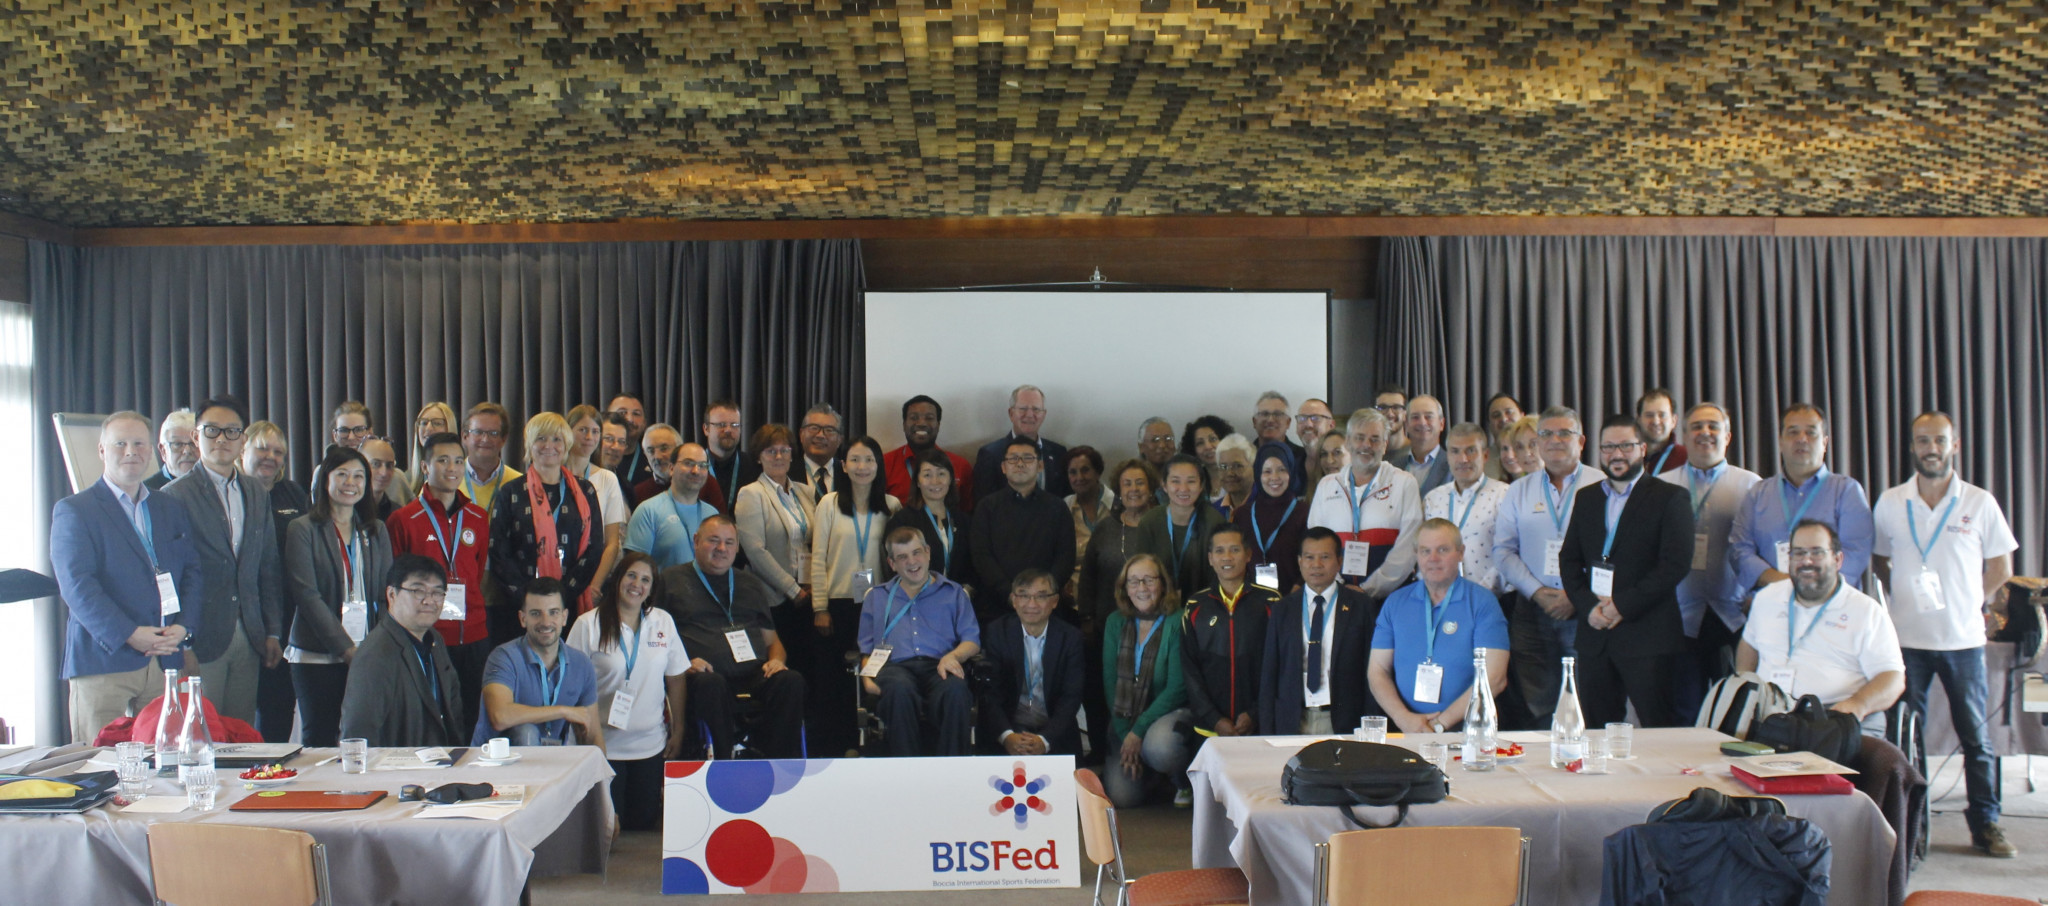 David Hadfield was re-elected at the General Assembly in Portugal ©BISFed